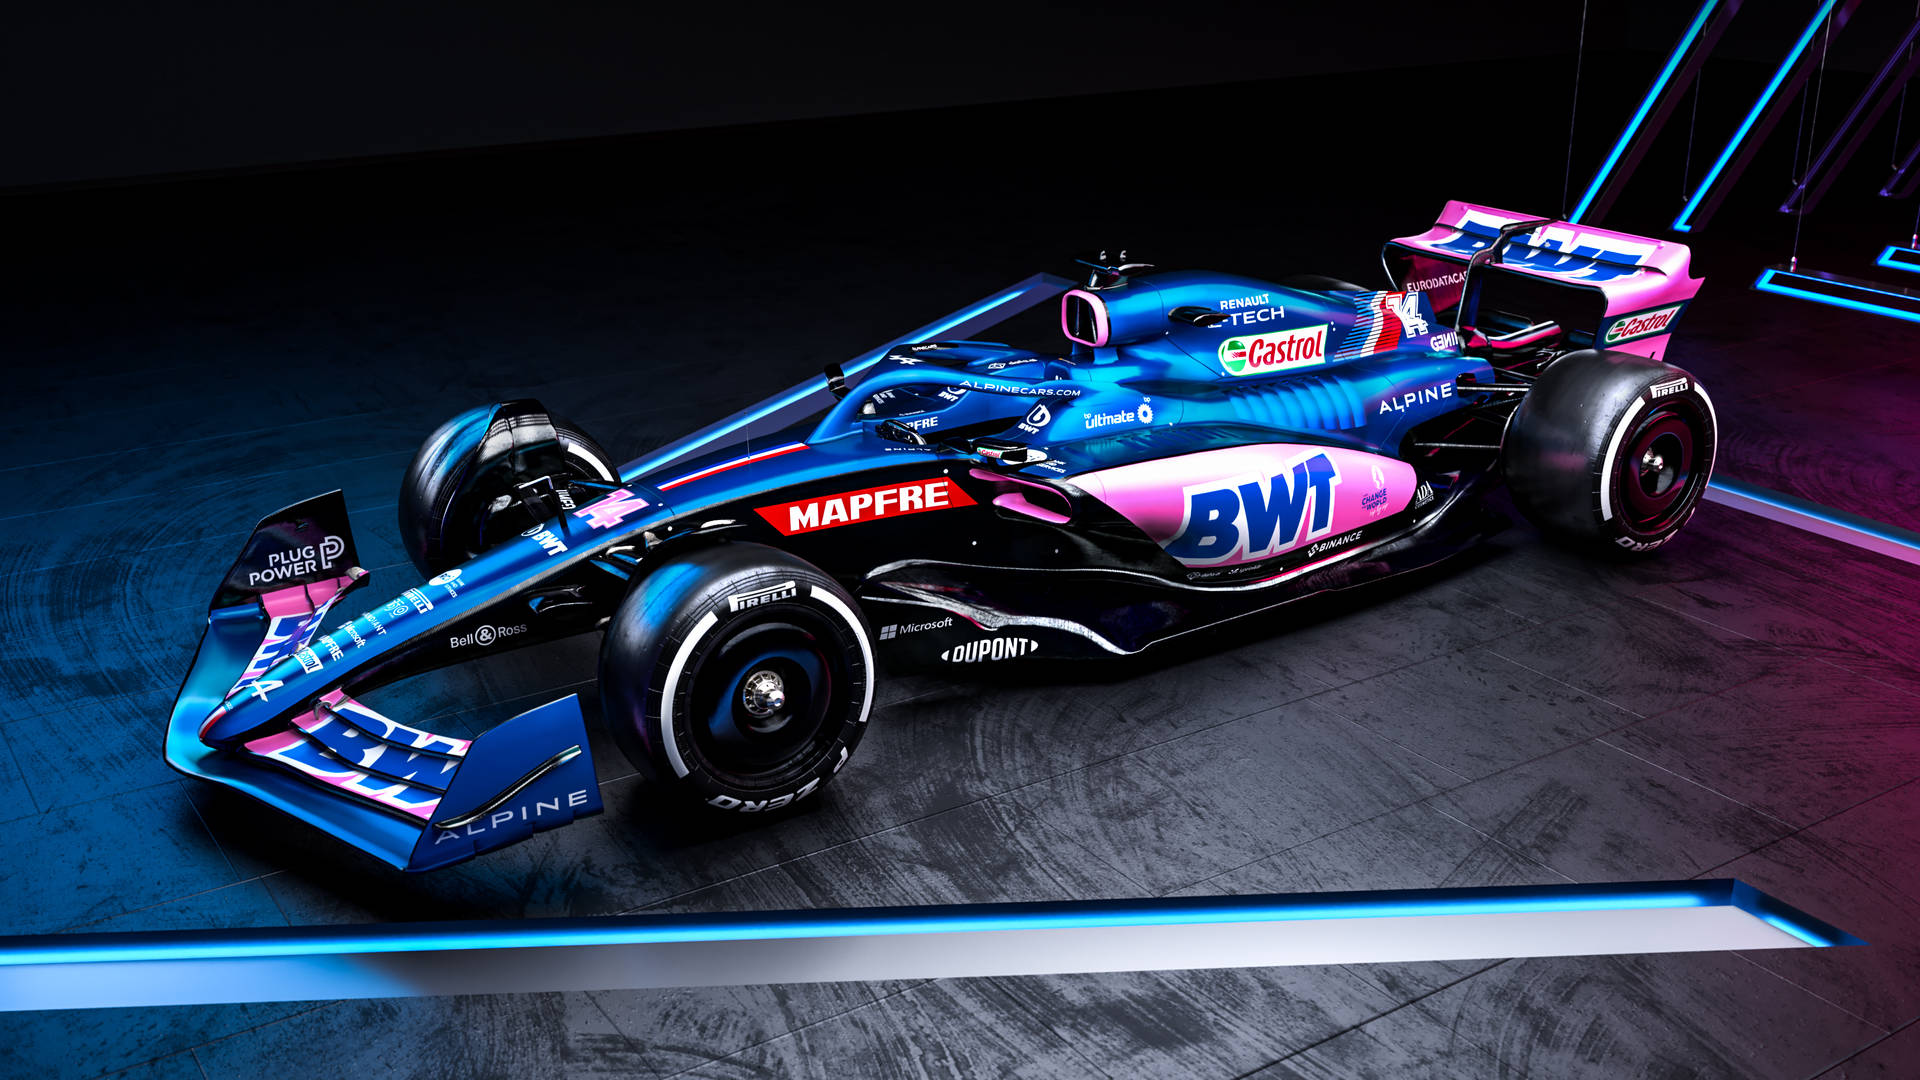 A Racing Car In A Dark Room With Neon Lights